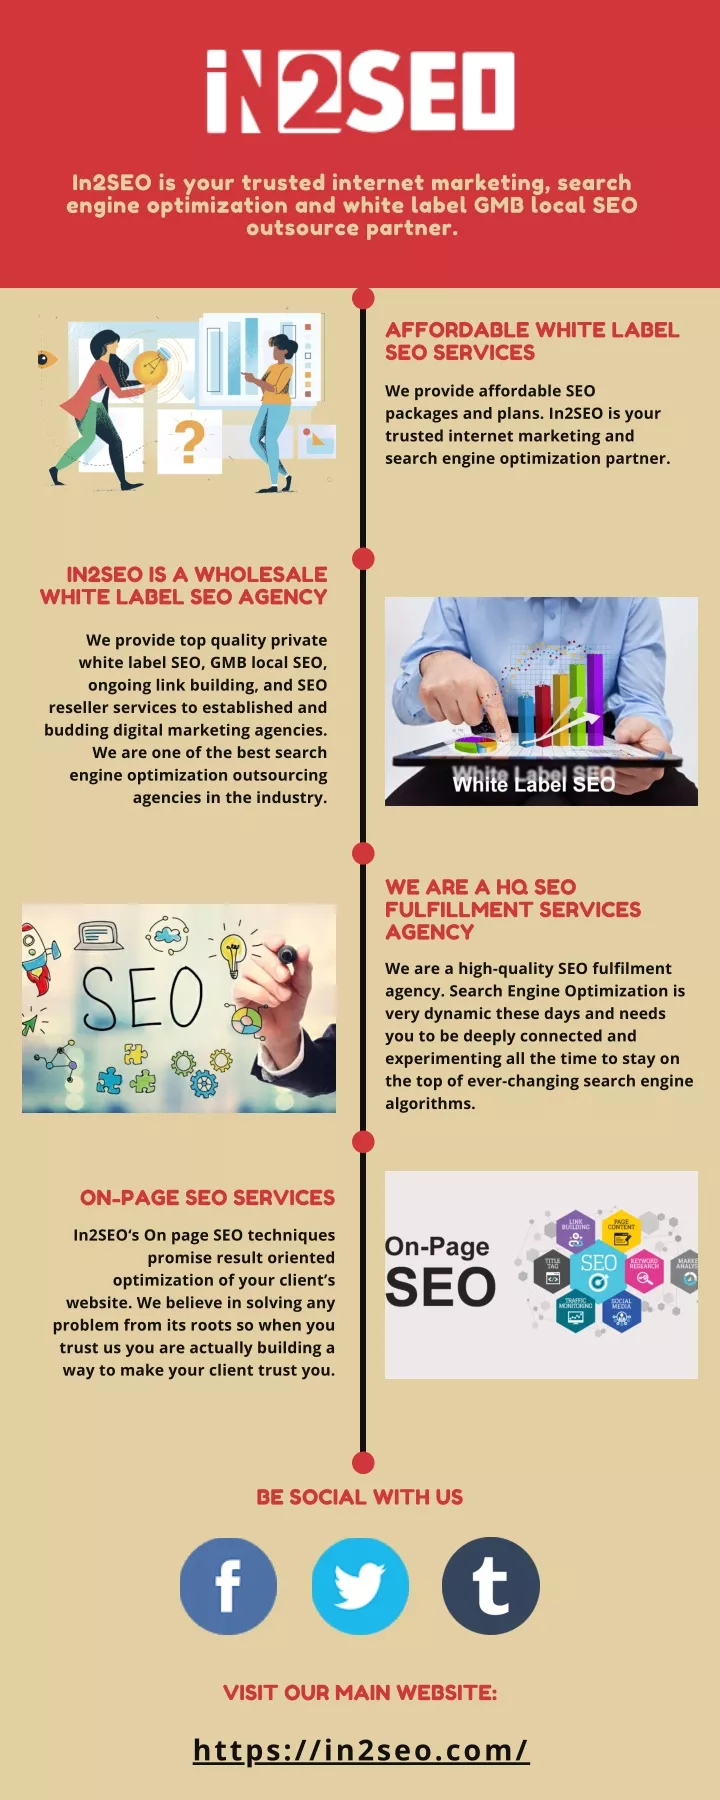 in2seo is your trusted internet marketing search